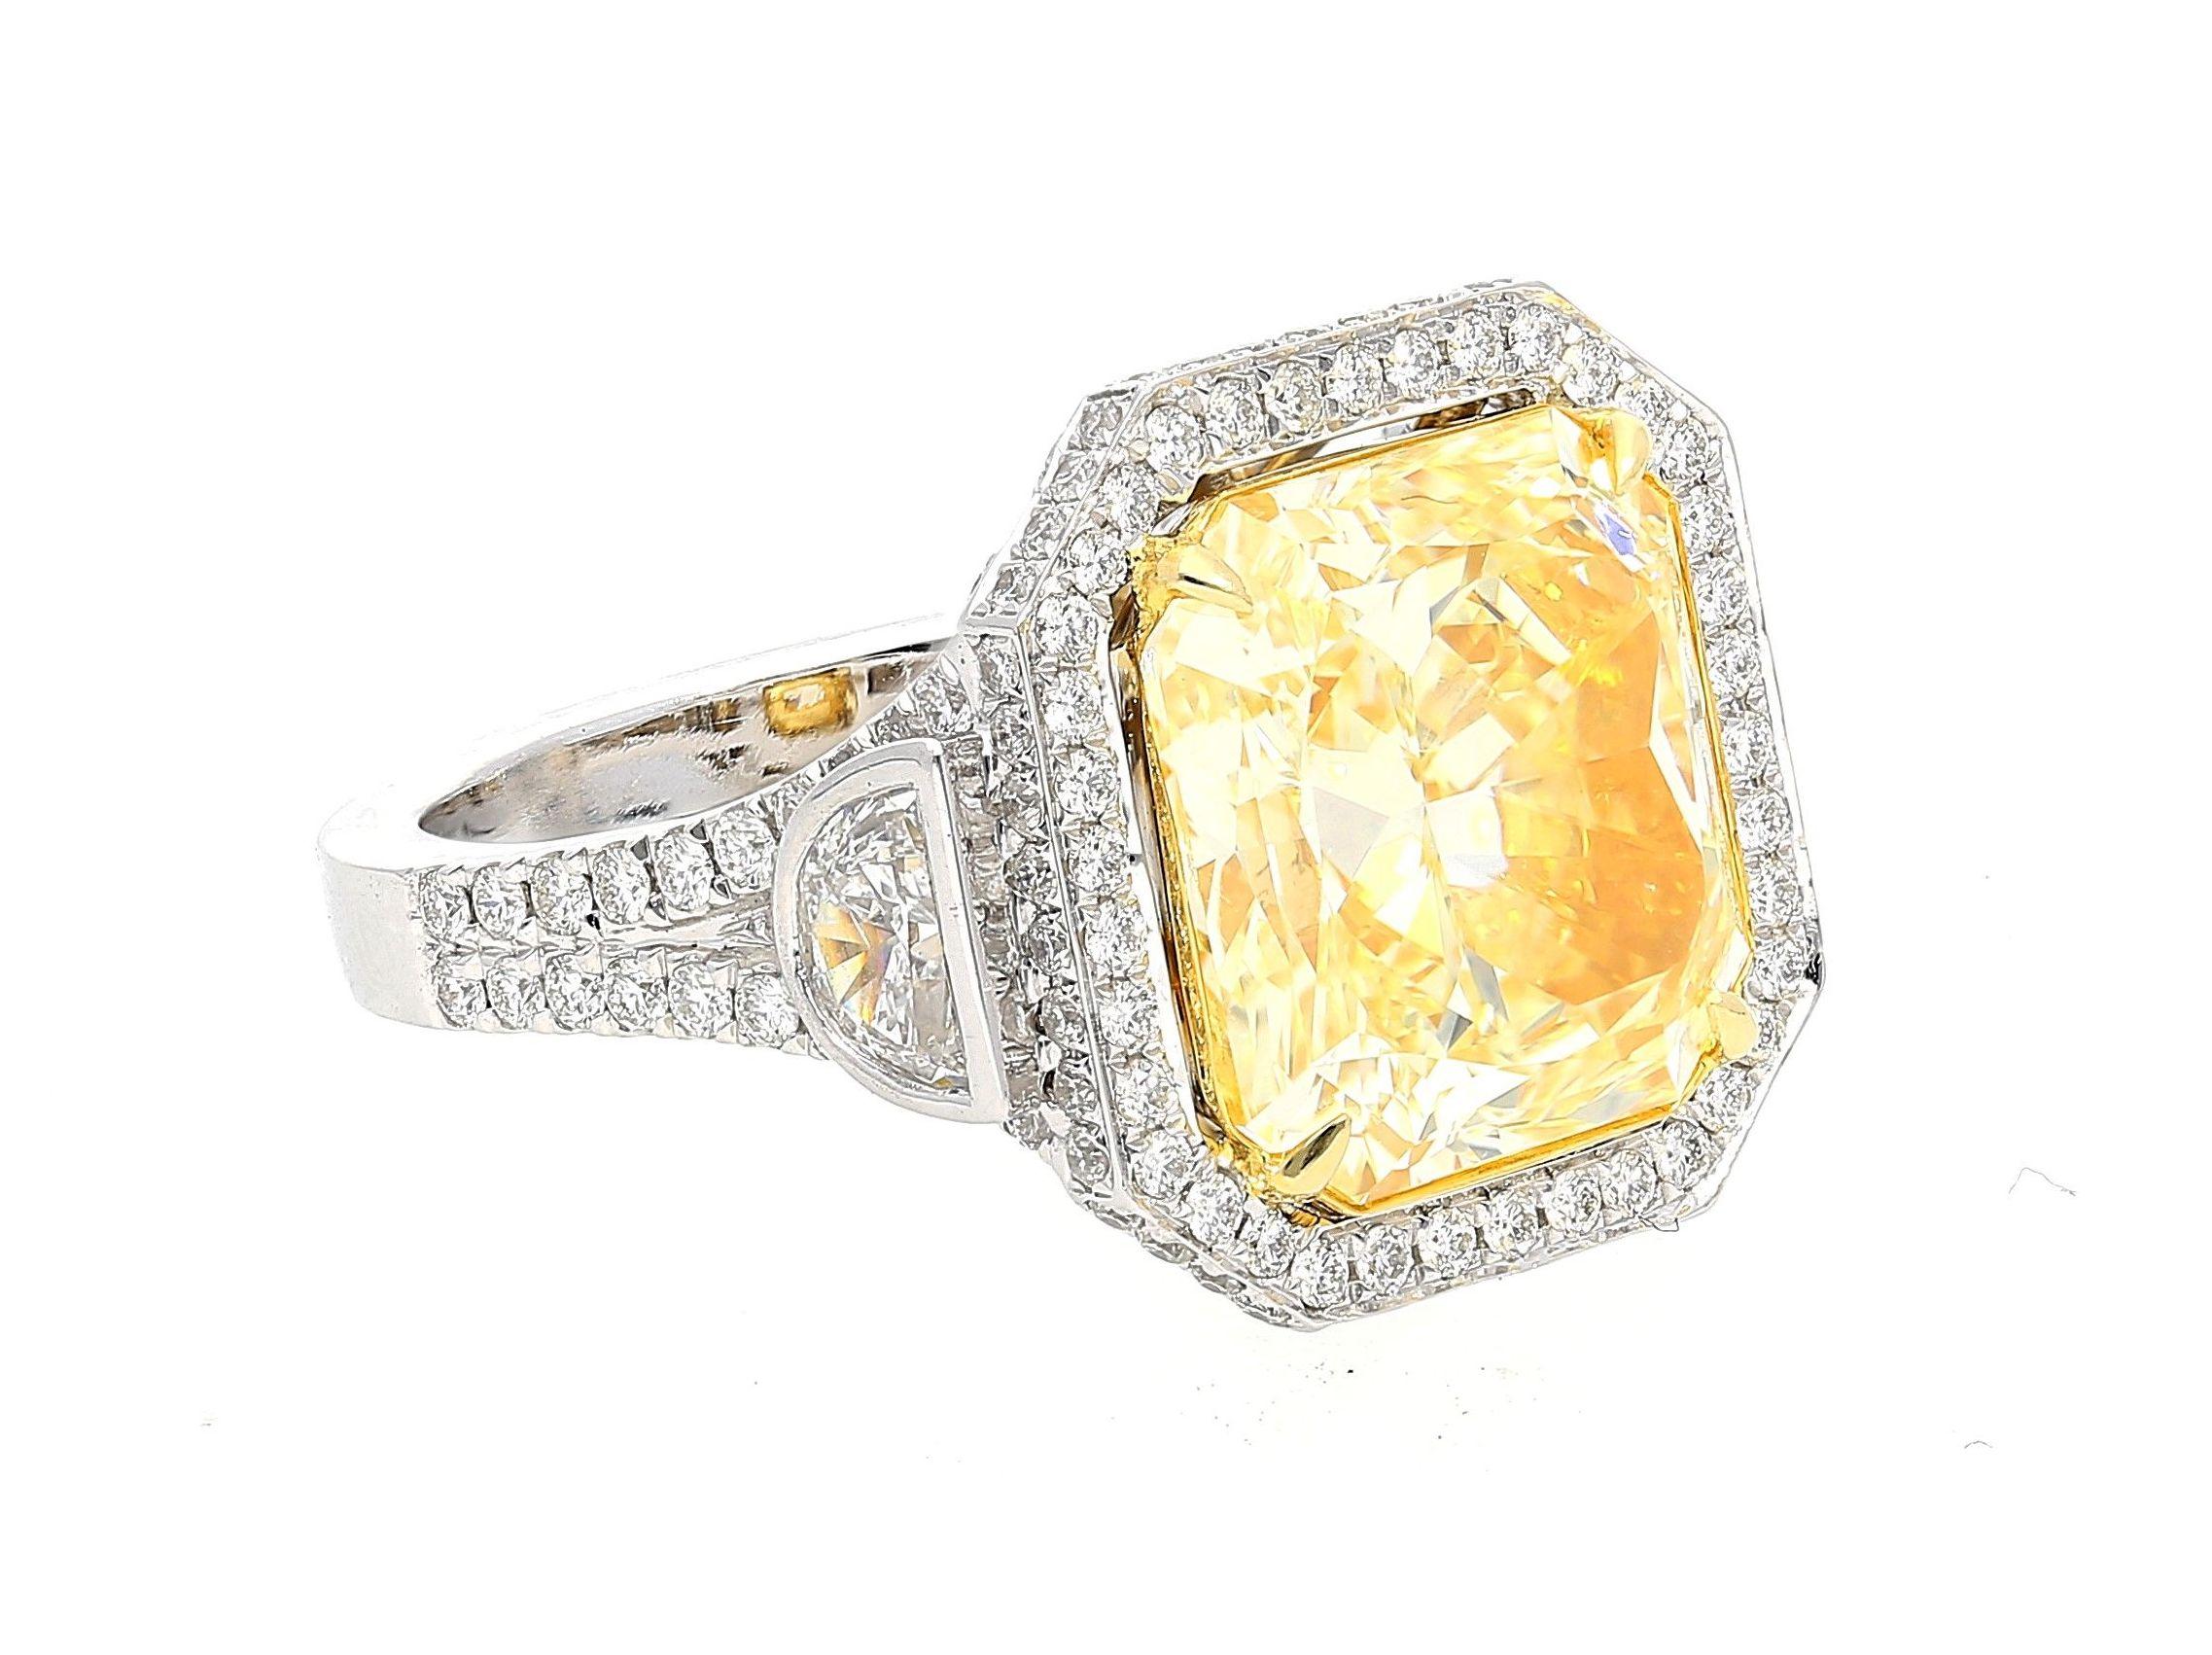 Centering a 7.52 Carat Radiant-Cut Fancy Yellow Diamond of VVS2 Clarity, flanked by two Half-Moon Cut Diamonds, further accented by Round-Brilliant Cut Diamonds, and set in 18K White/Yellow Gold.

Details:
✔ Stone: Fancy Yellow Diamond
✔ Diamond